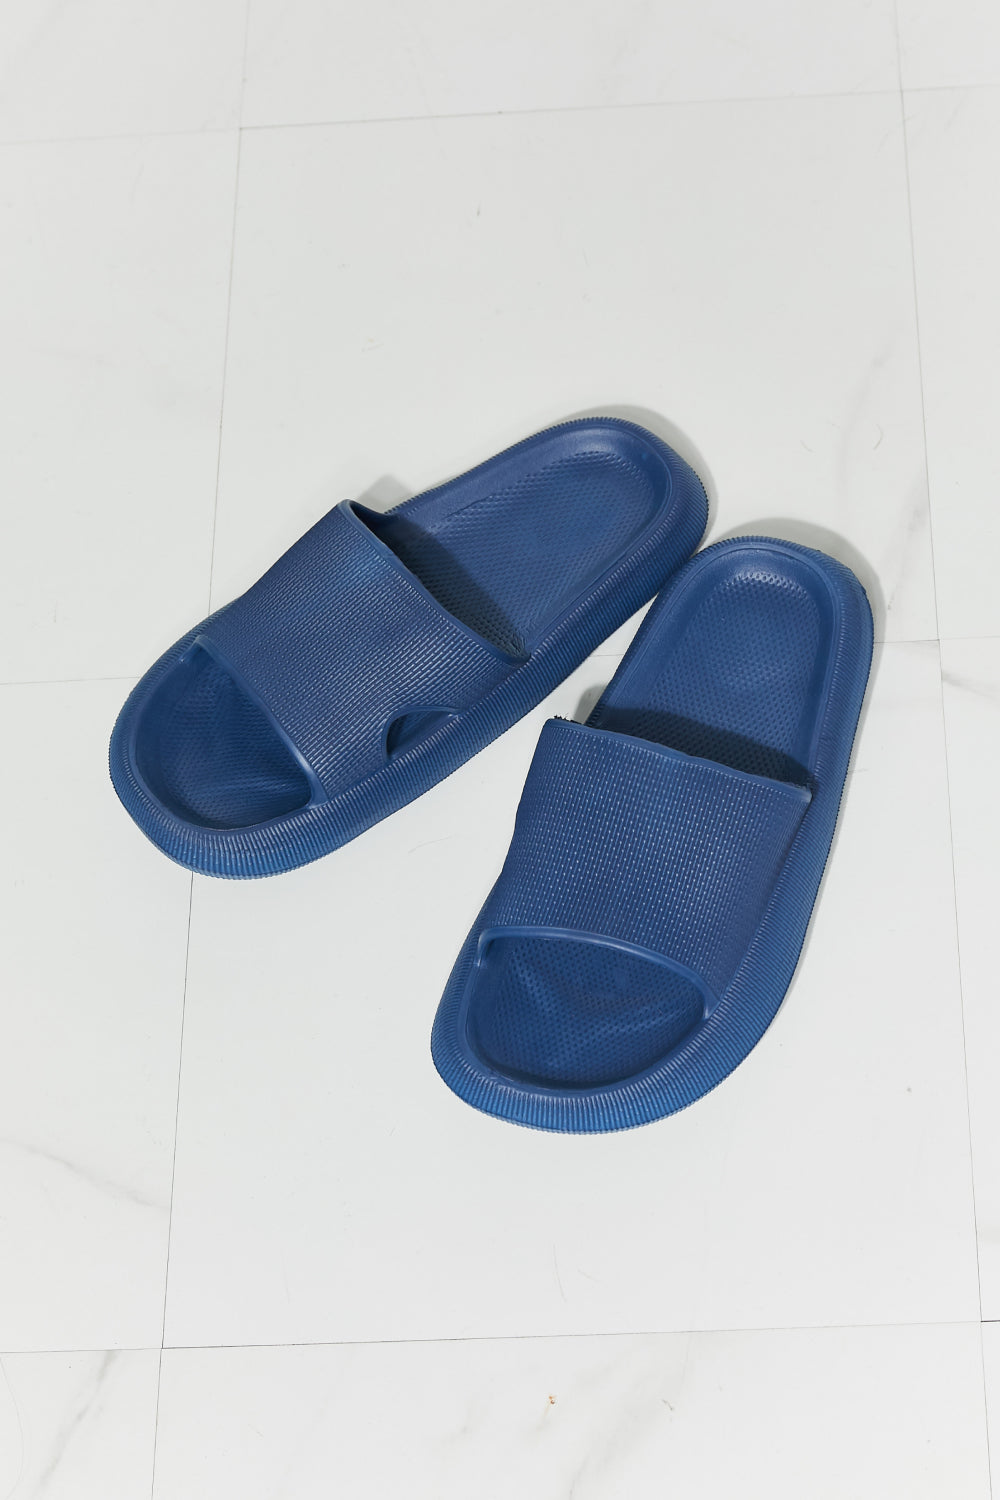 MMShoes Arms Around Me Open Toe Slide in Navy - BEAUTY COSMOTICS SHOP